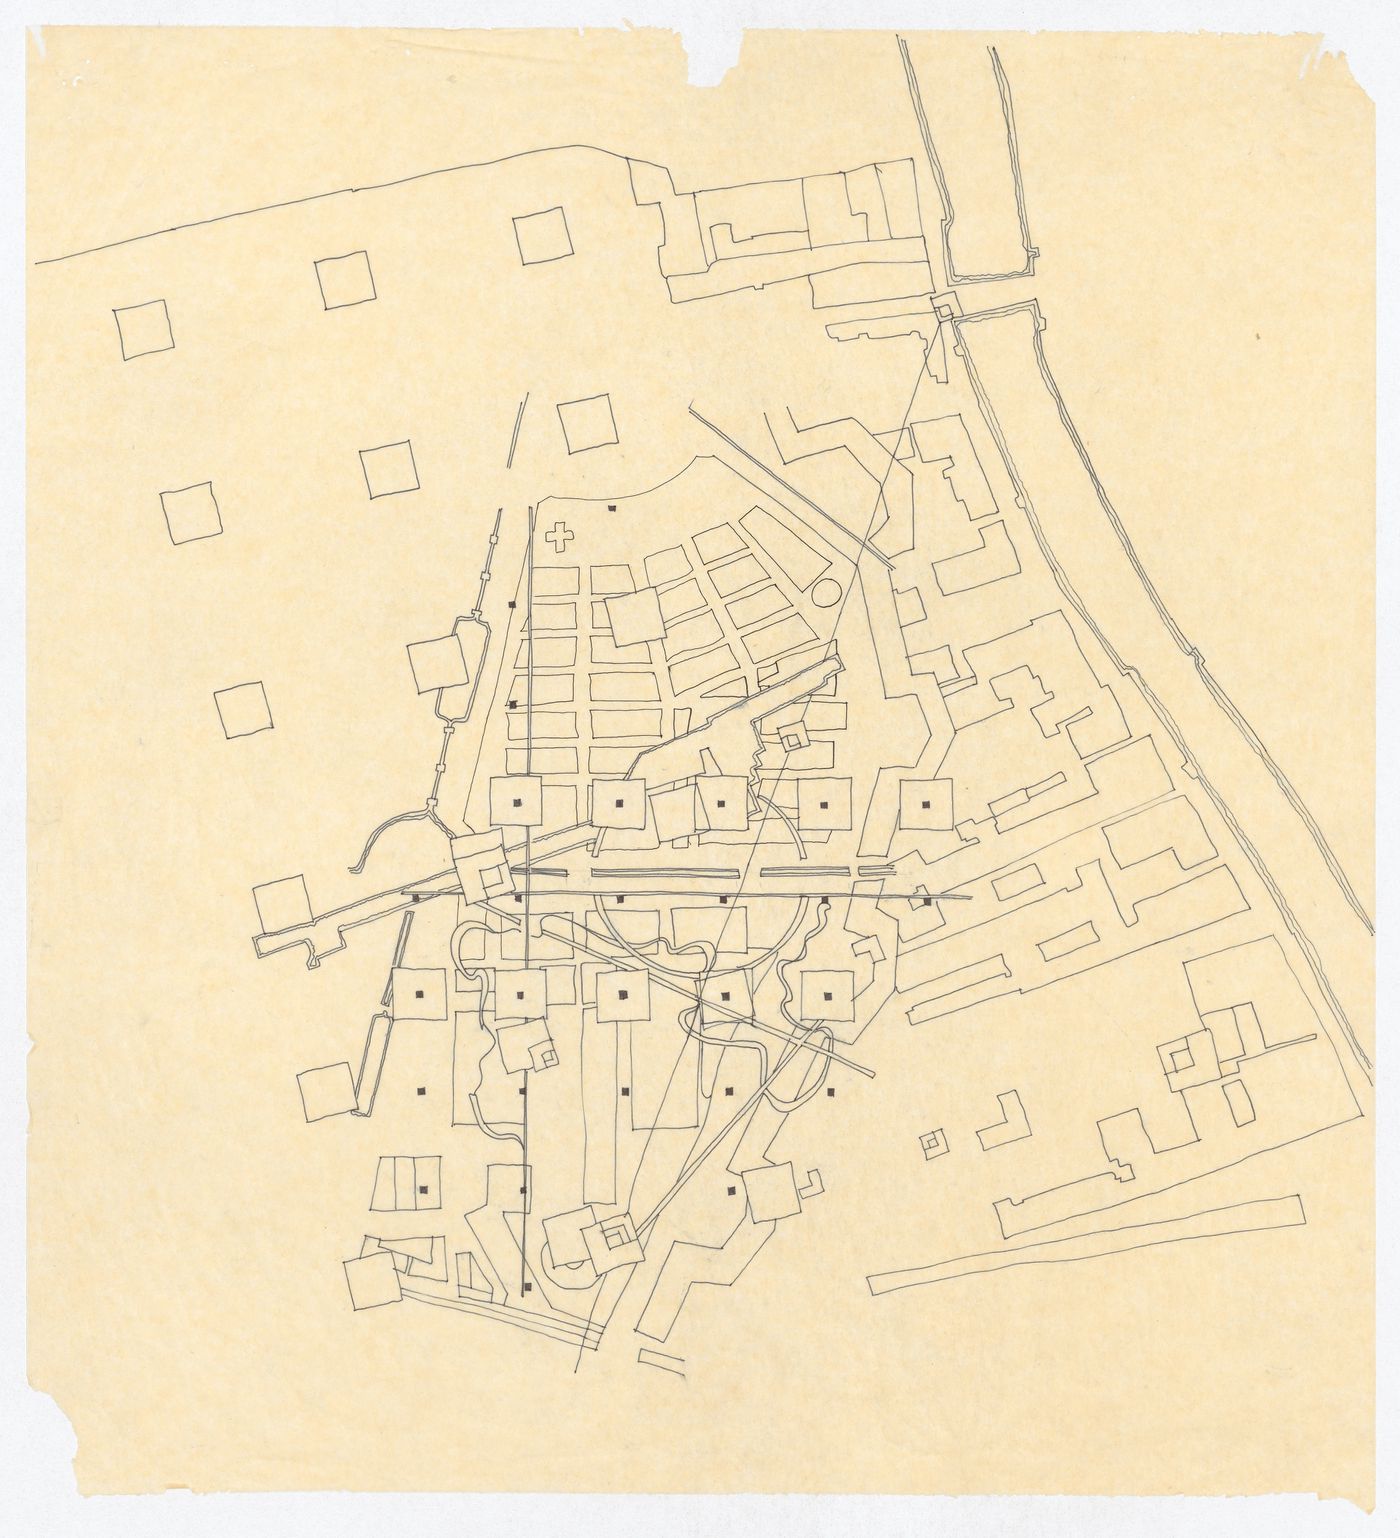 Sketch plan showing the superposition of the Cannaregio and La Villette sites with their axes at right angle